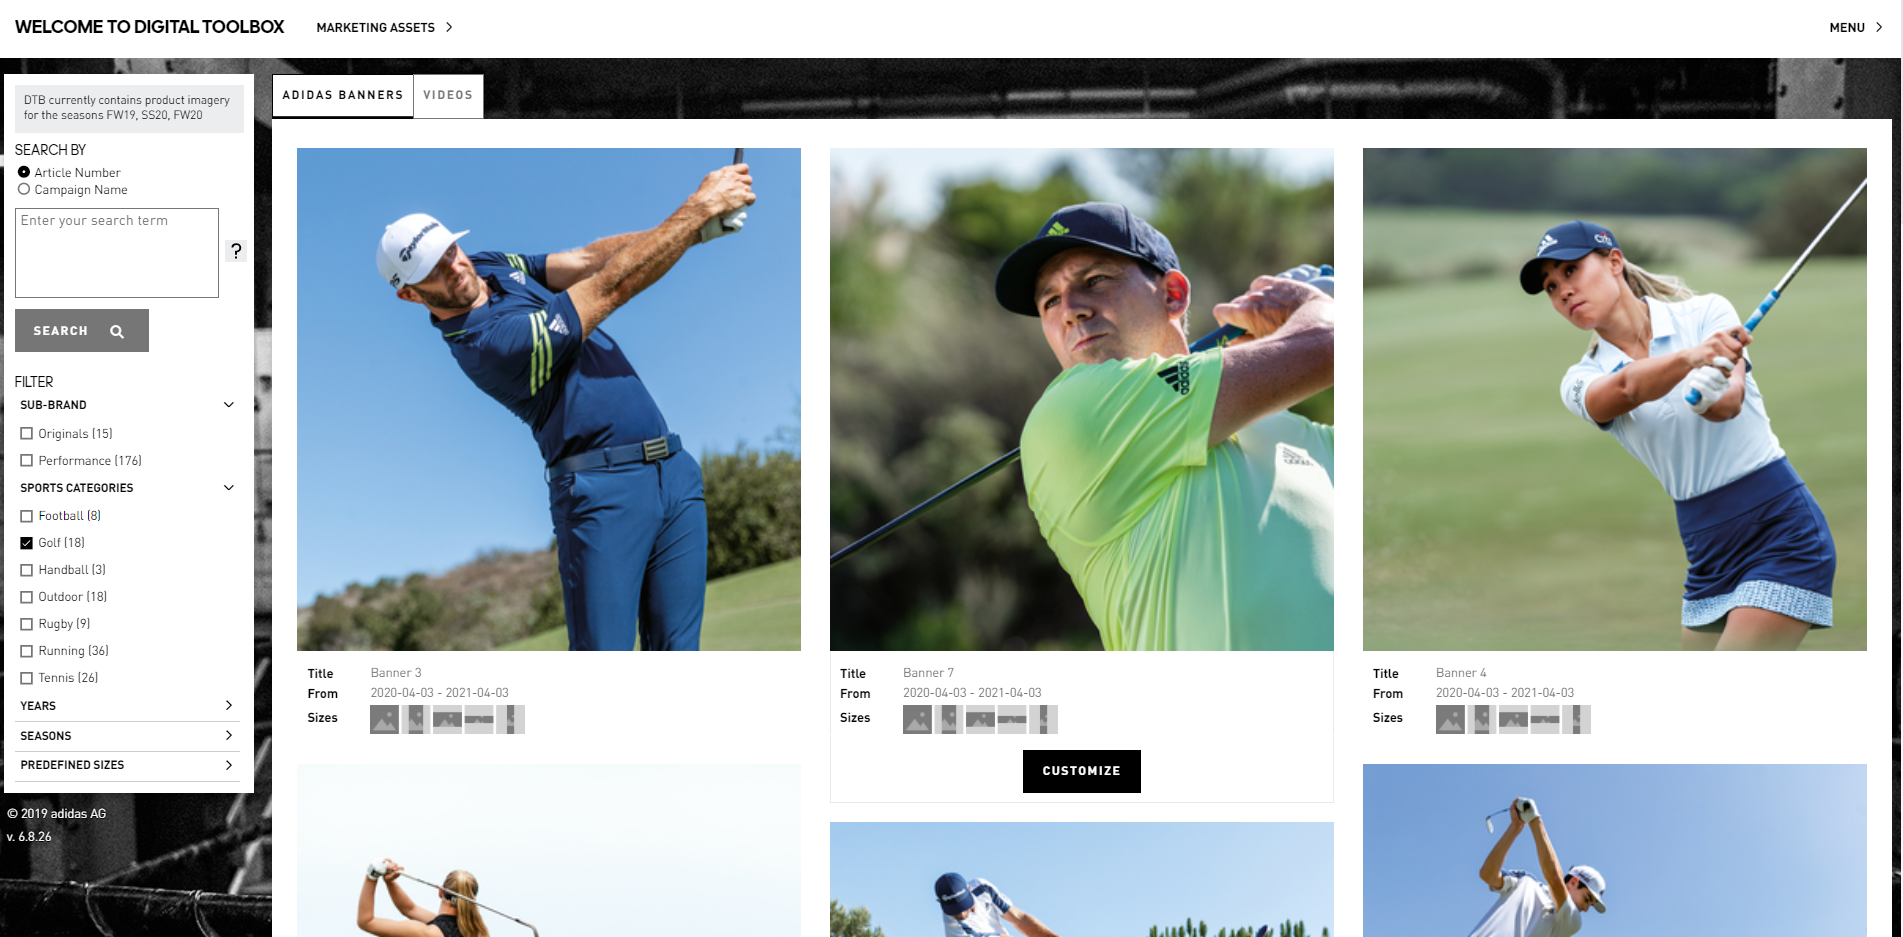 B2B tool from adidas Golf just a CLICK 